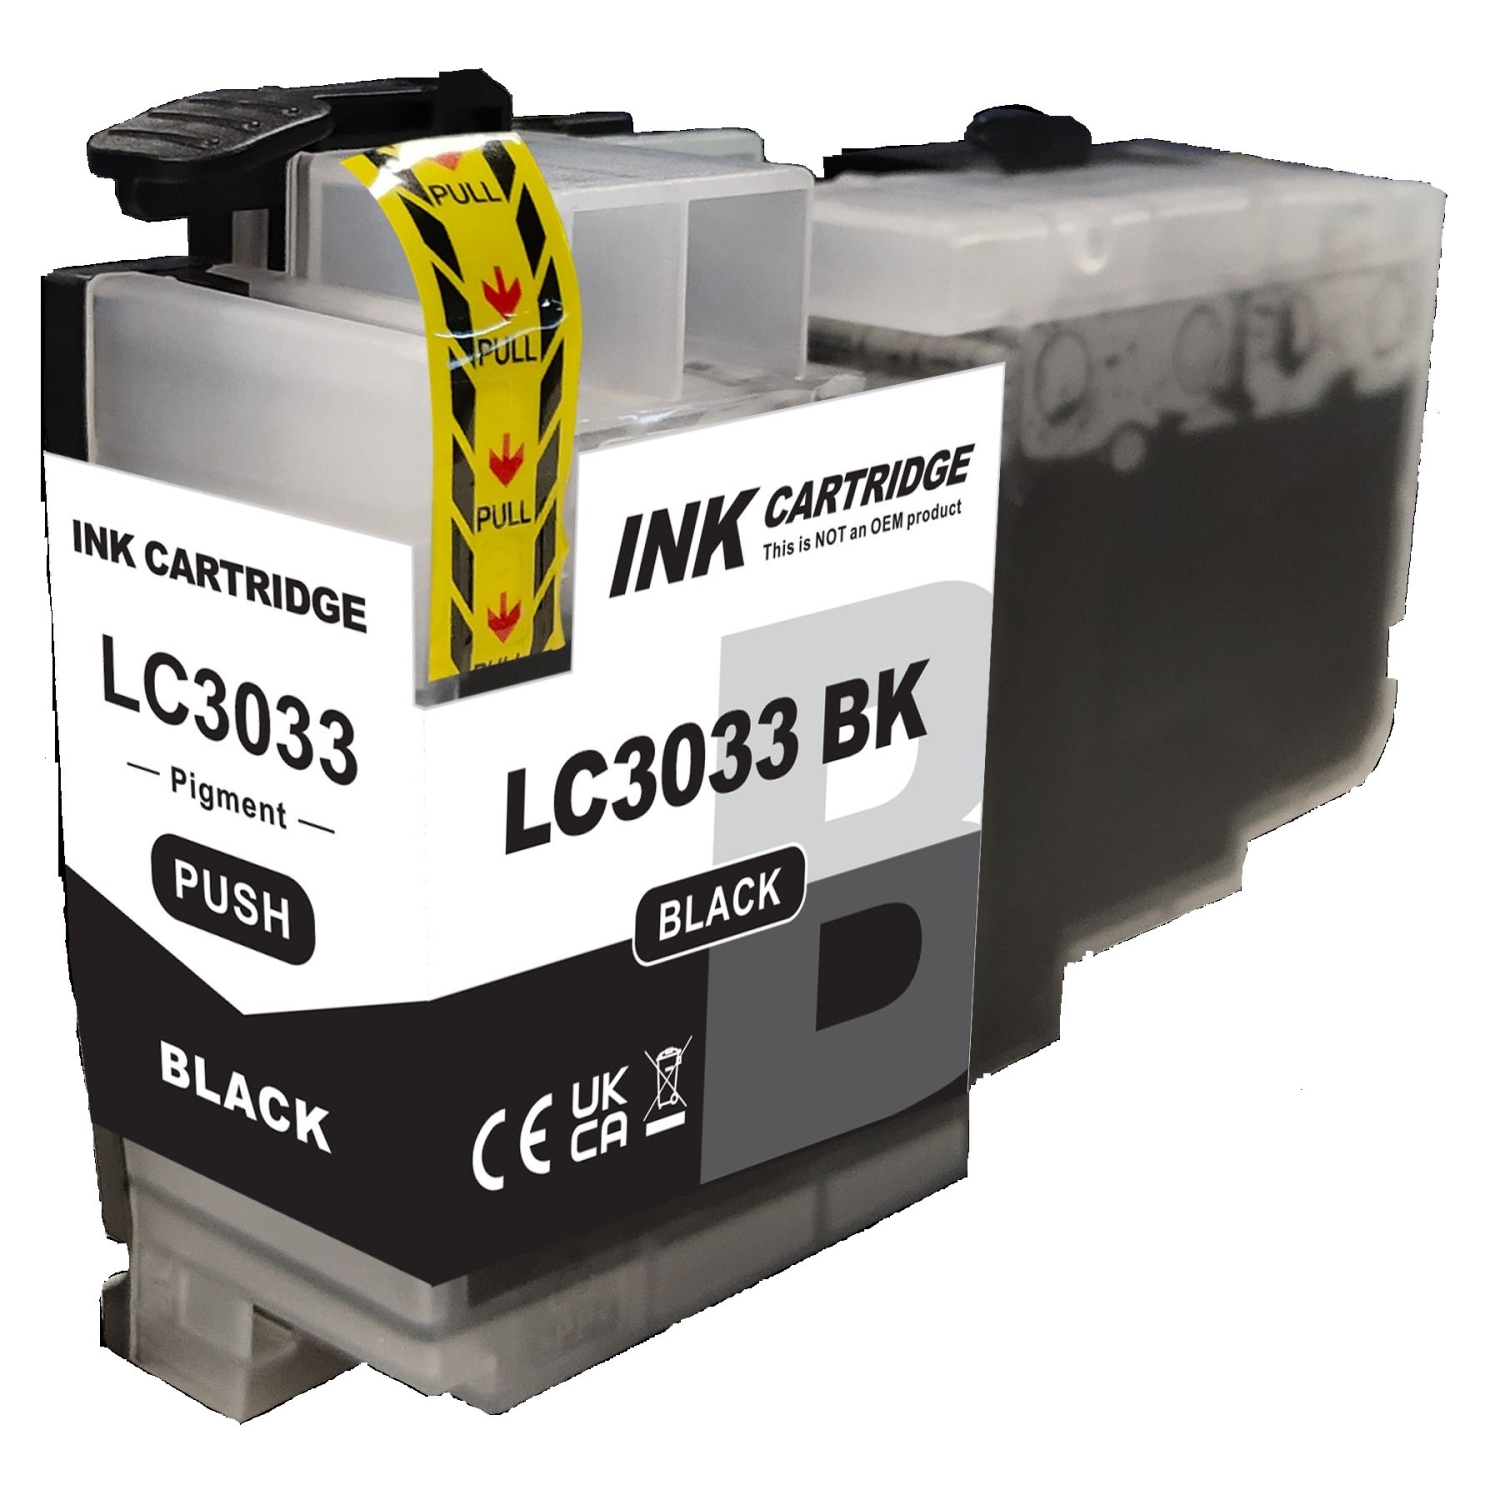 Max Saving - 1 Black Compatible Ink Cartridge Extra High Yield for Brother LC3033XXL MFC-J805DW, MFC-J995DW, MFC-J995DWX